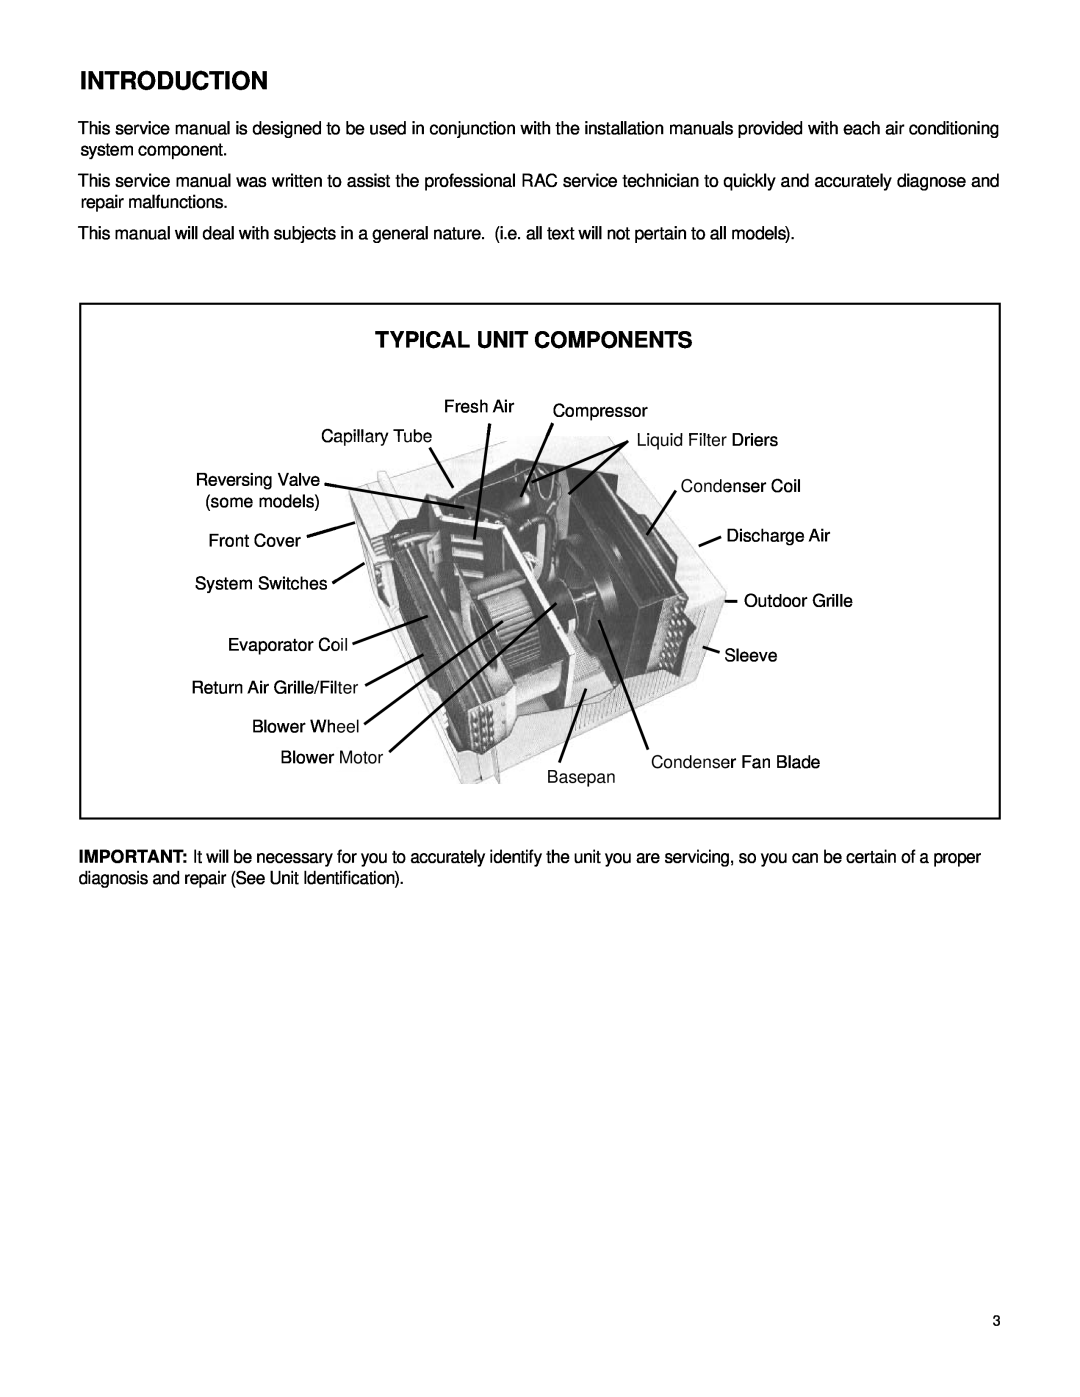 Friedrich 2007 service manual Introduction, Typical Unit Components 